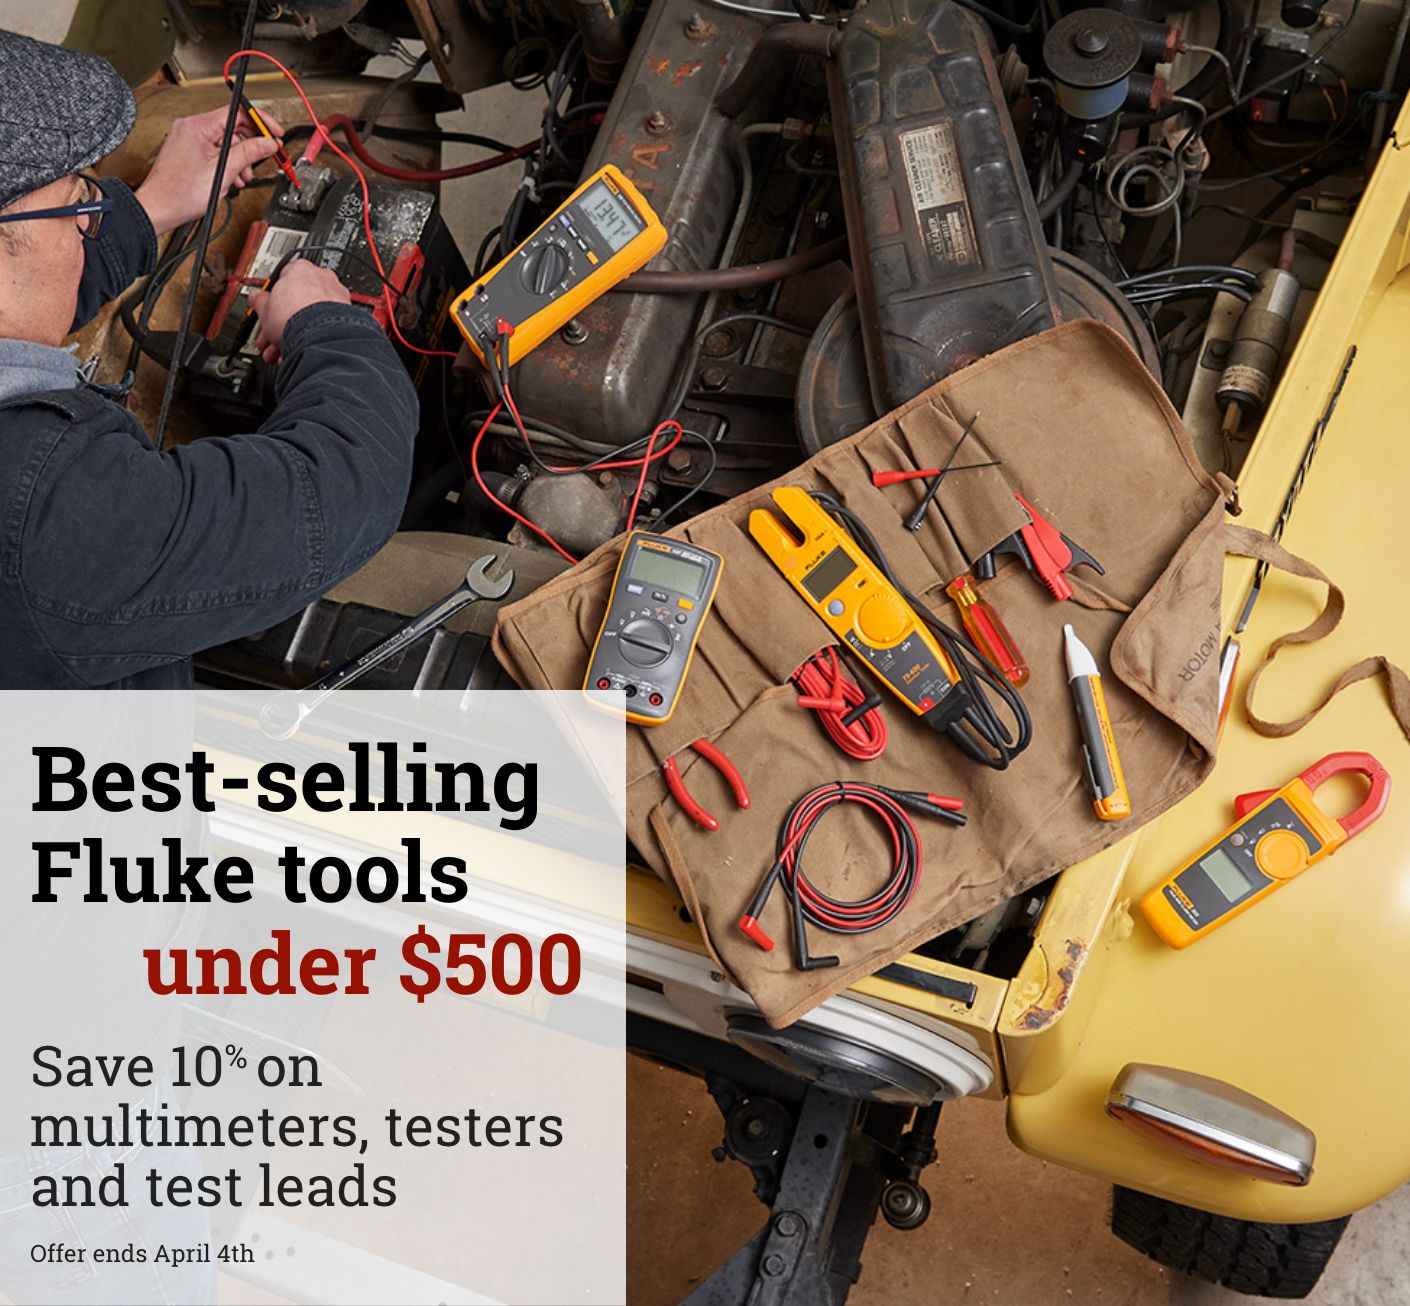 Save 10% on multimeters, testers and test leads